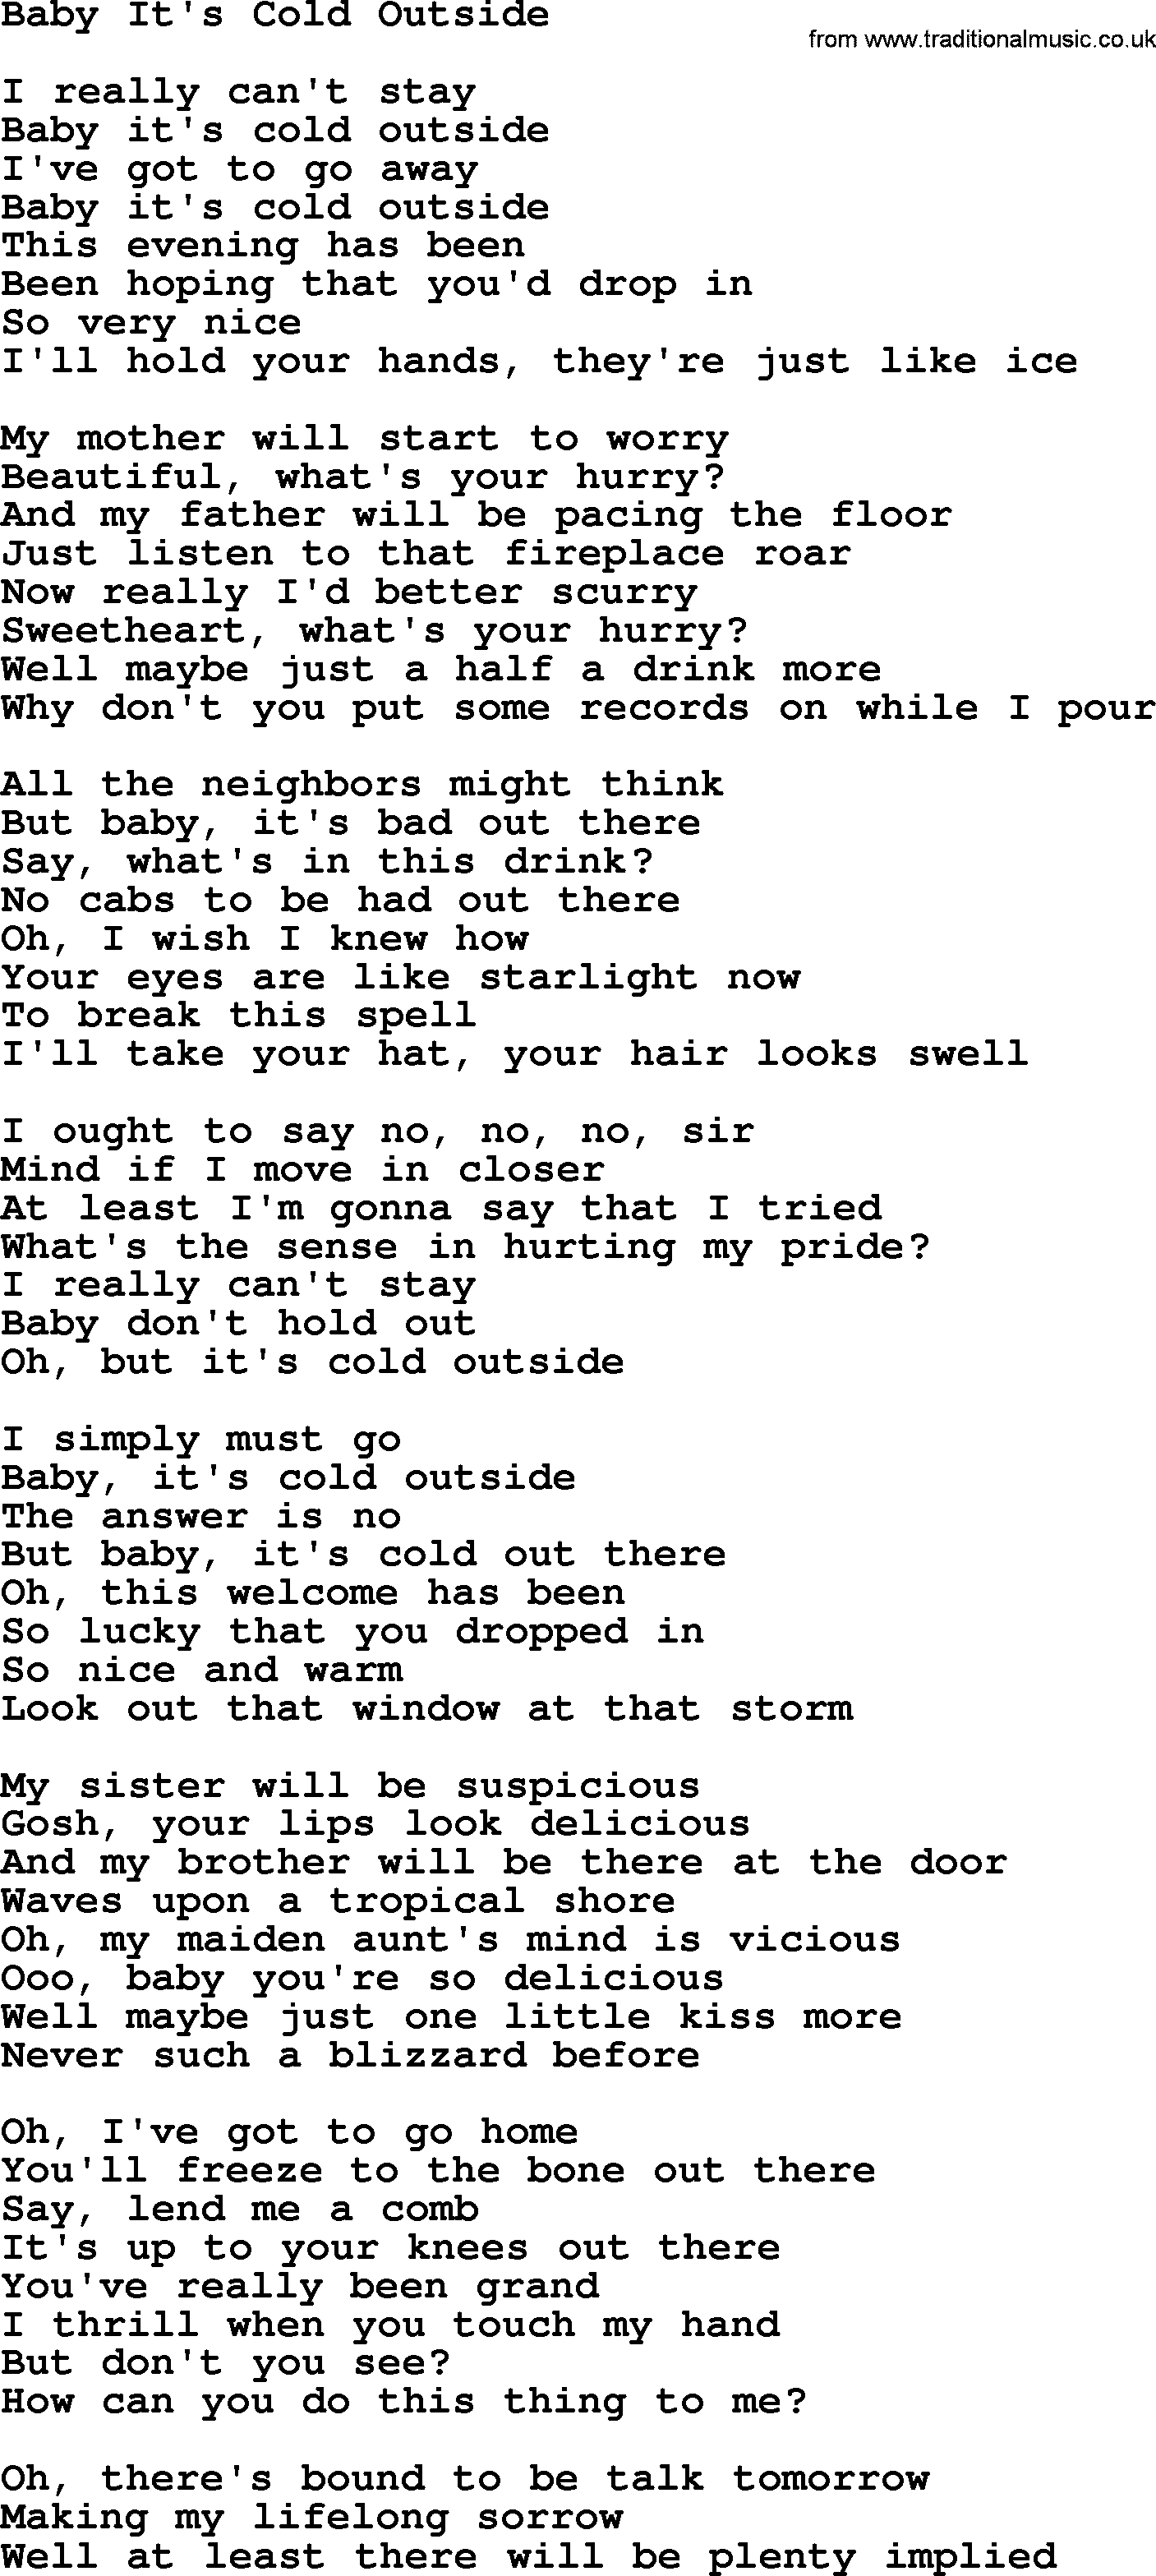 Willie Nelson song: Baby It's Cold Outside lyrics